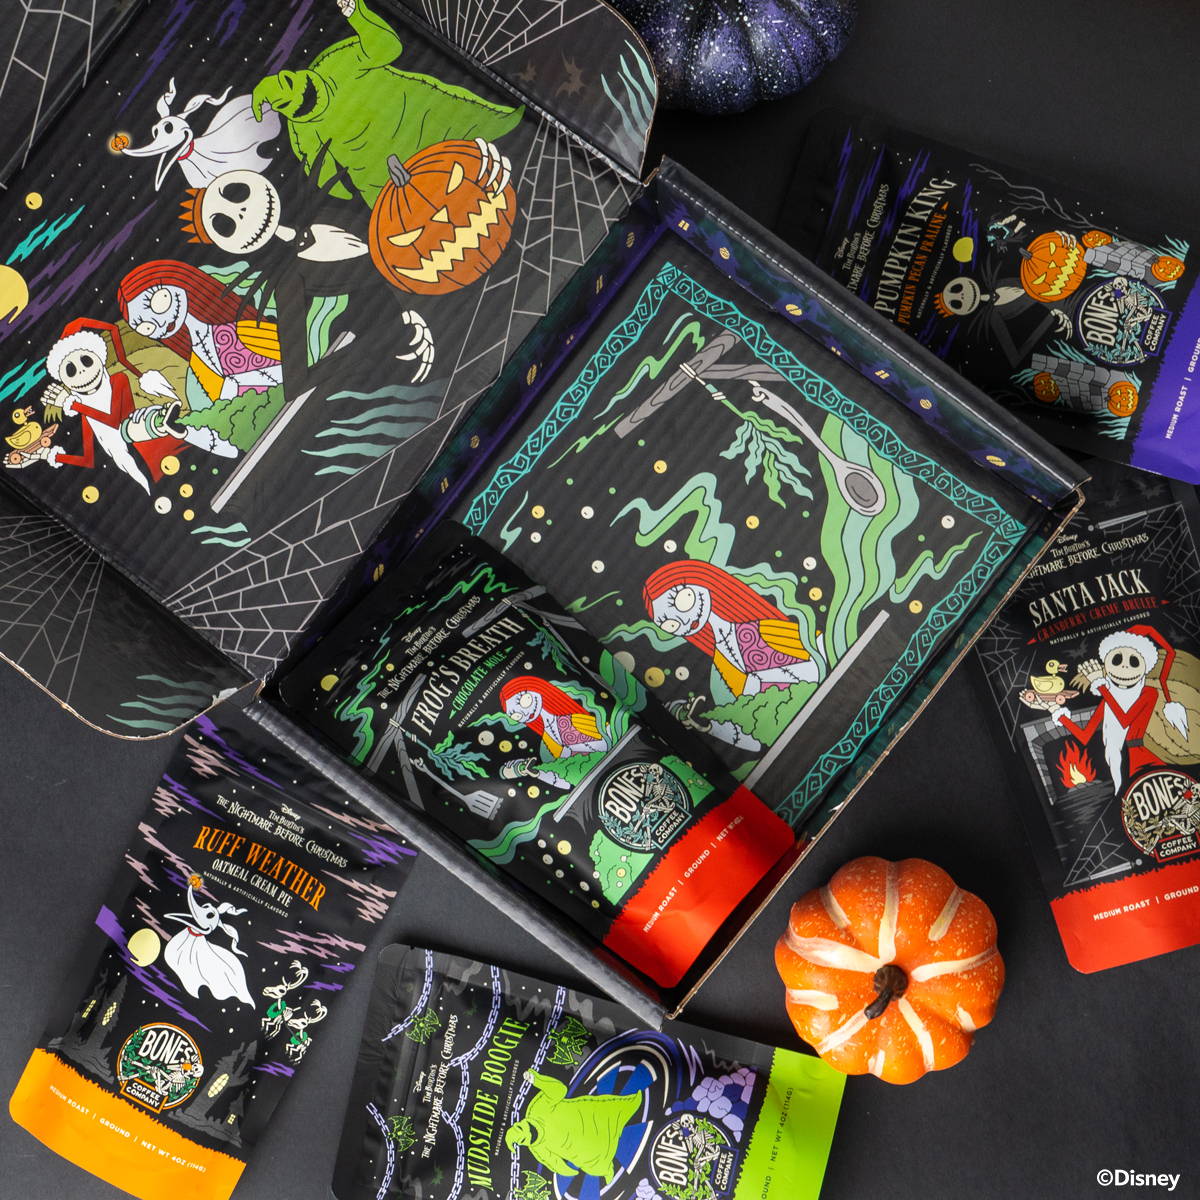 The Collector's Box inspired by Disney Tim Burton’s The Nightmare Before Christmas with 5 coffees in 4 oz bags. The names are Mudslide Boogie, Santa Jack, Ruff Weather, Frog's Breath, The Pumpkin King.